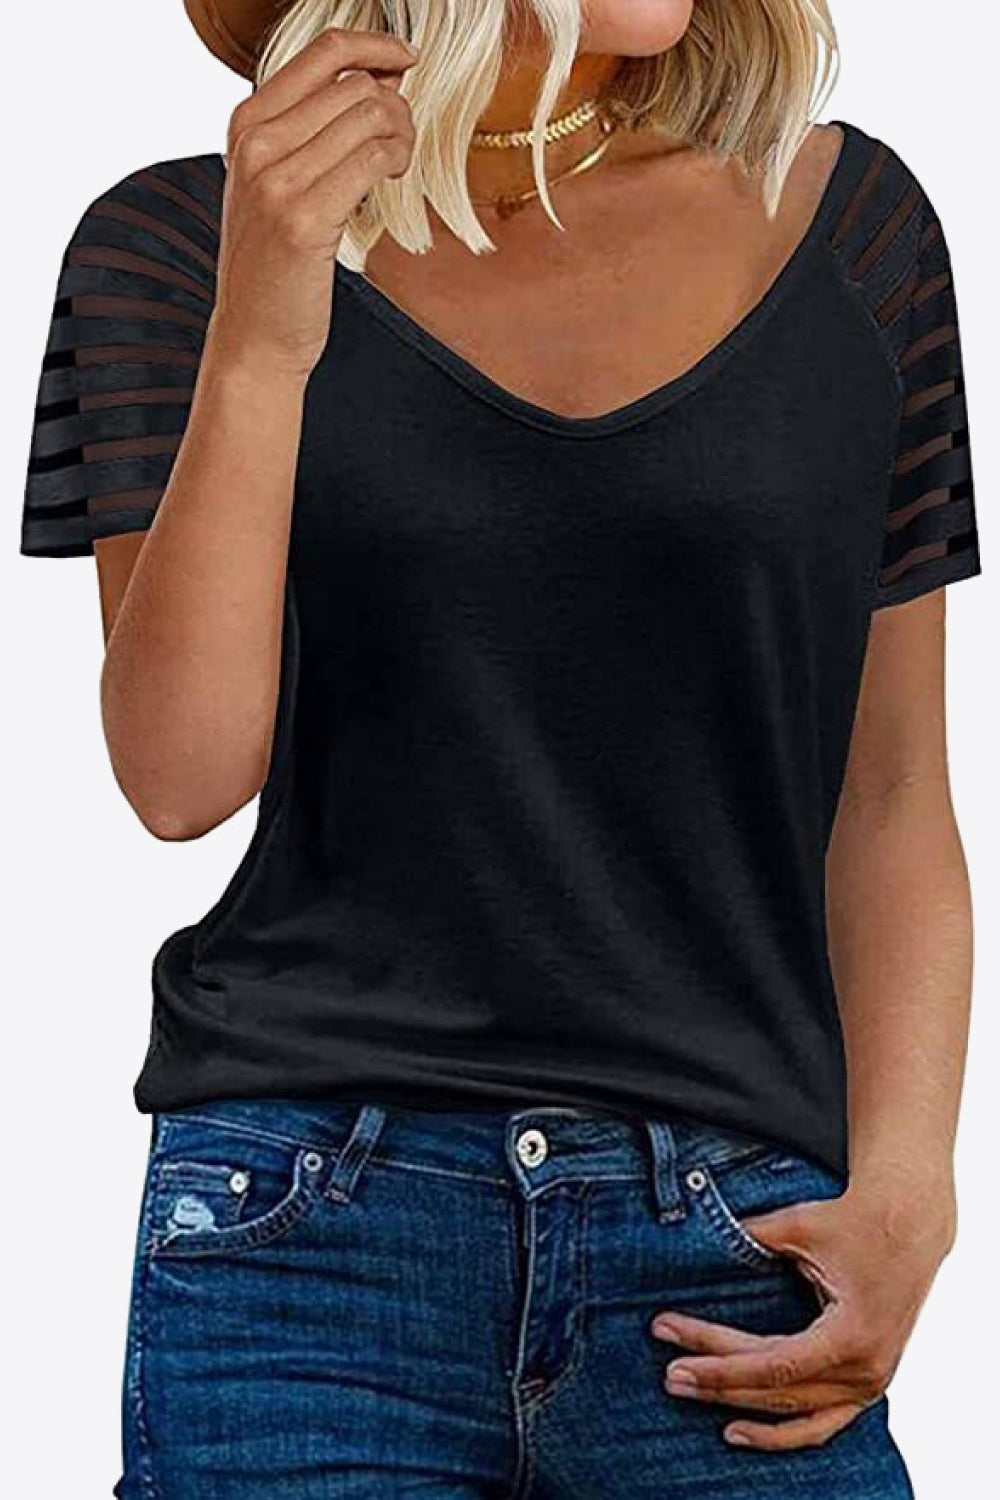 Black Womens Sheer Striped Sleeve Tee in 8 colors, Very Highly Stretchy Rayon Spandex Blend Fabric Material, True to Size Fit, Shortsleeve Tee, V-Neckline